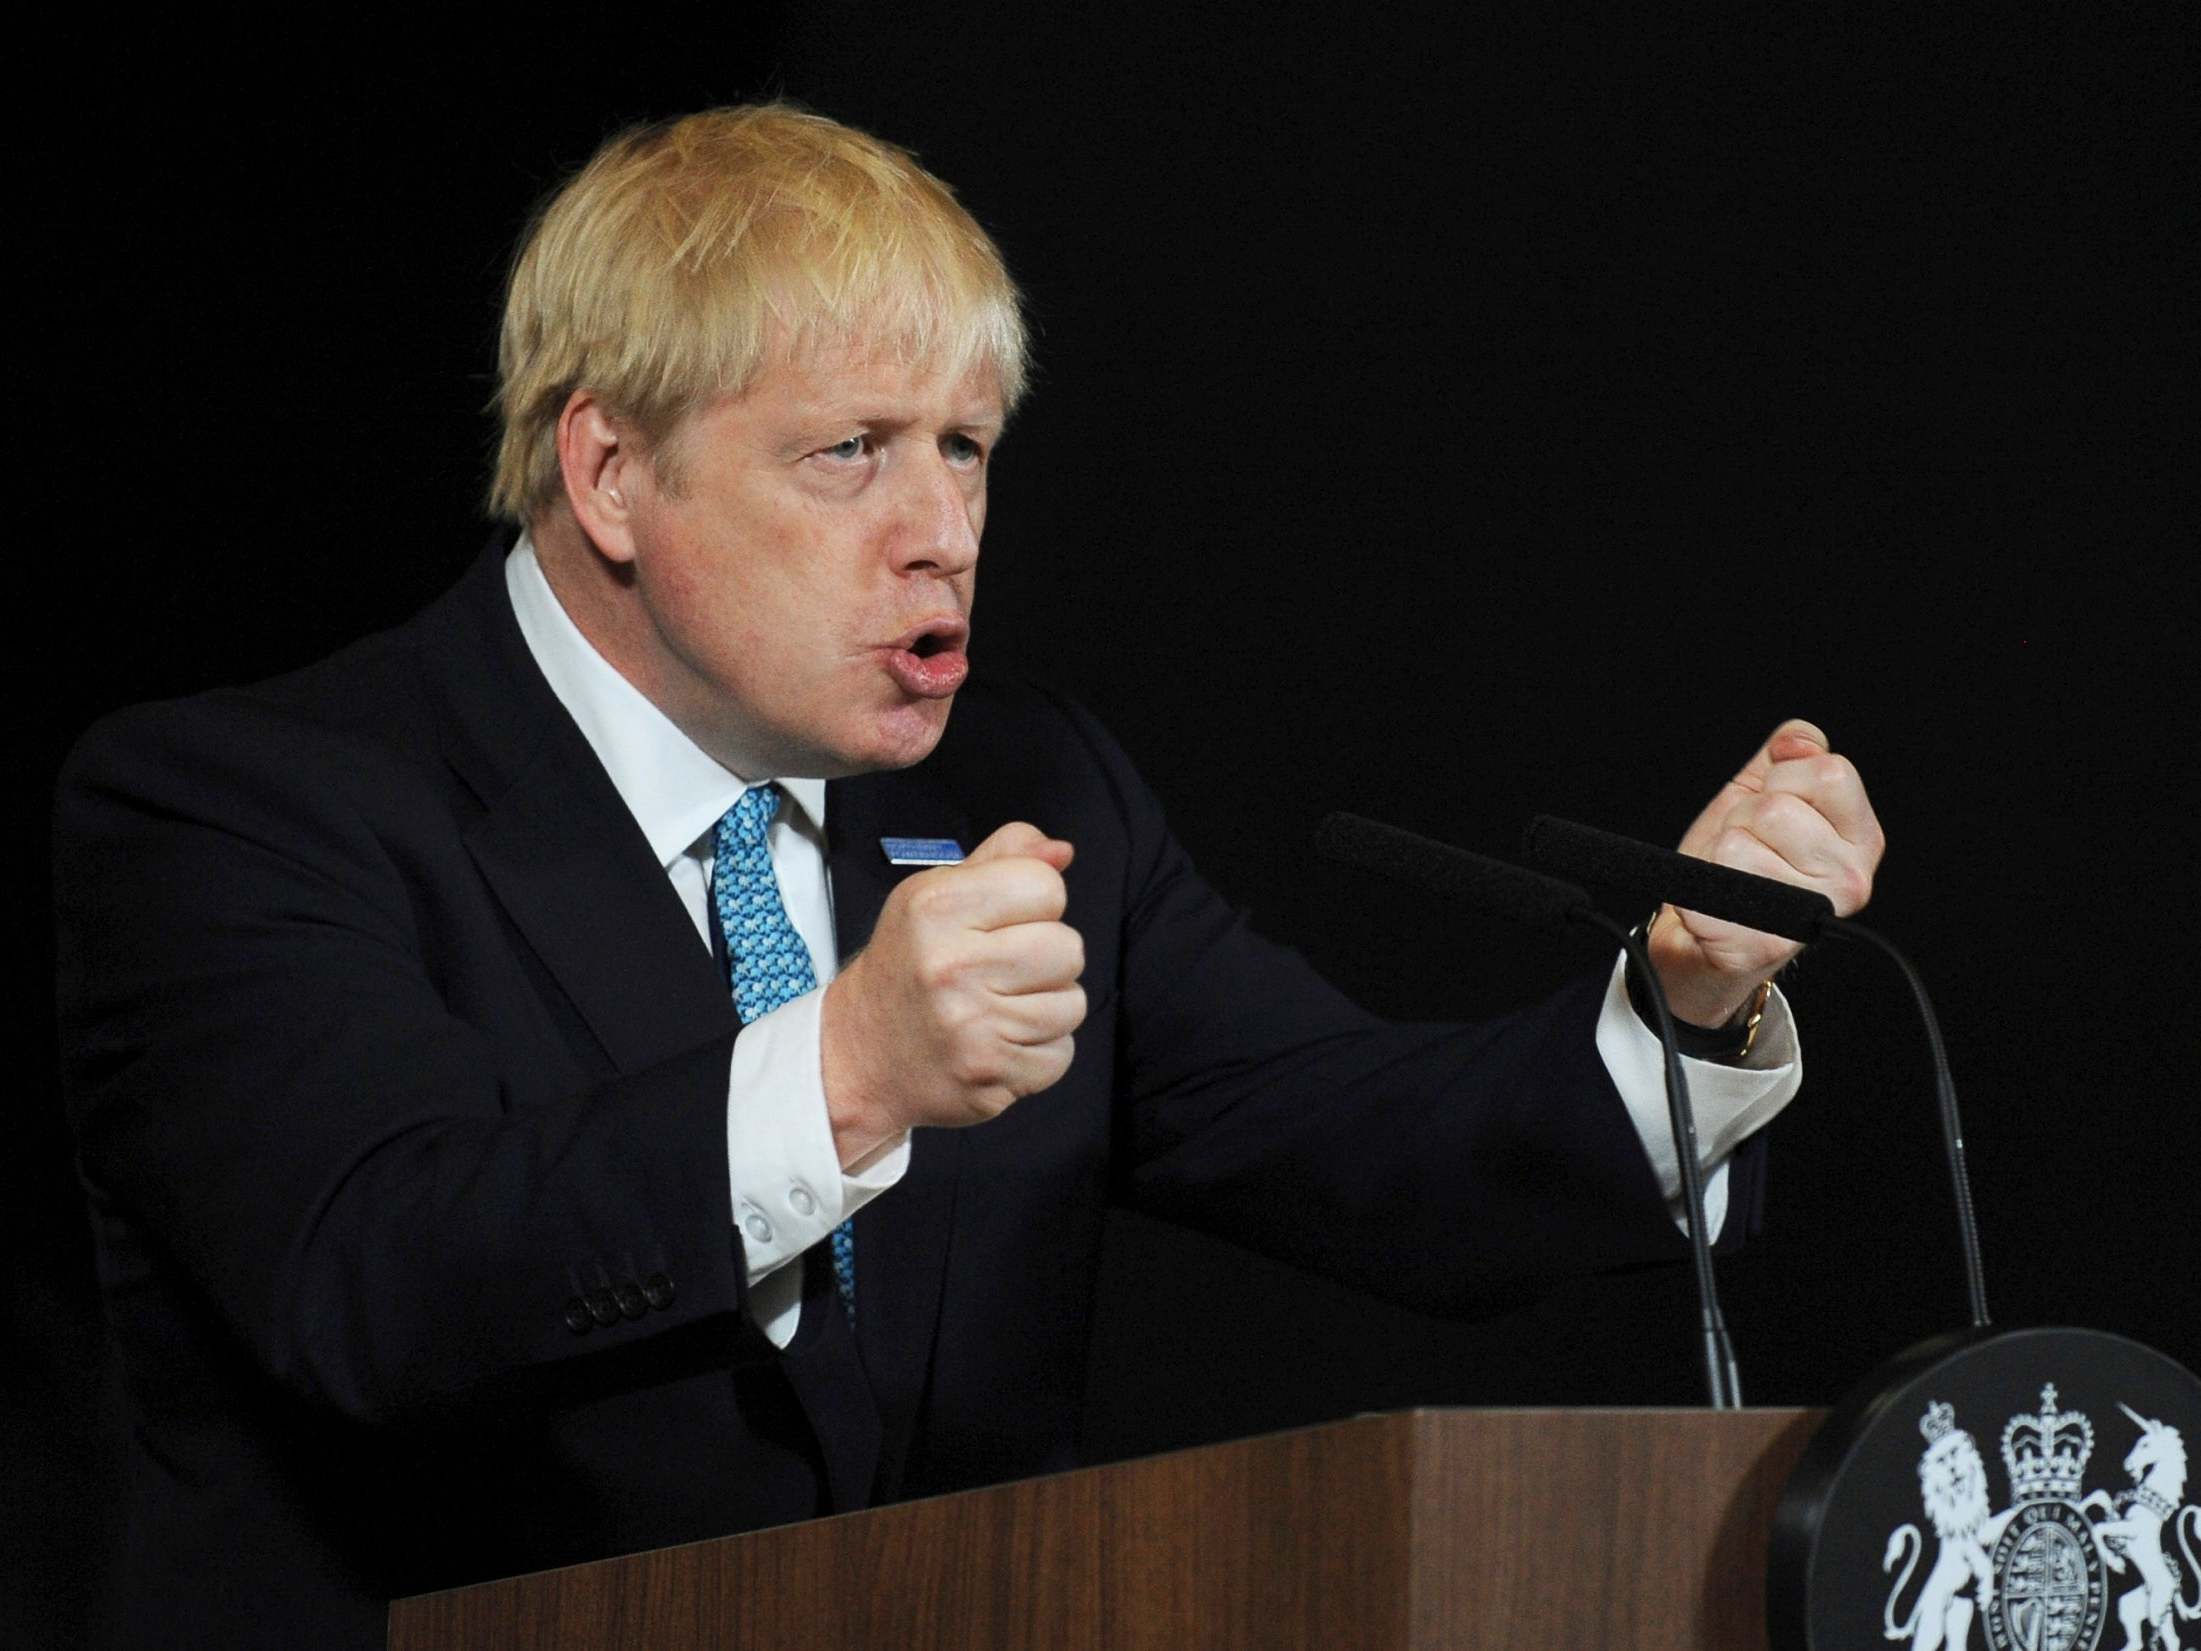 By admitting that ramping up the talk of no deal is a negotiating technique, Johnson rather gives the game away